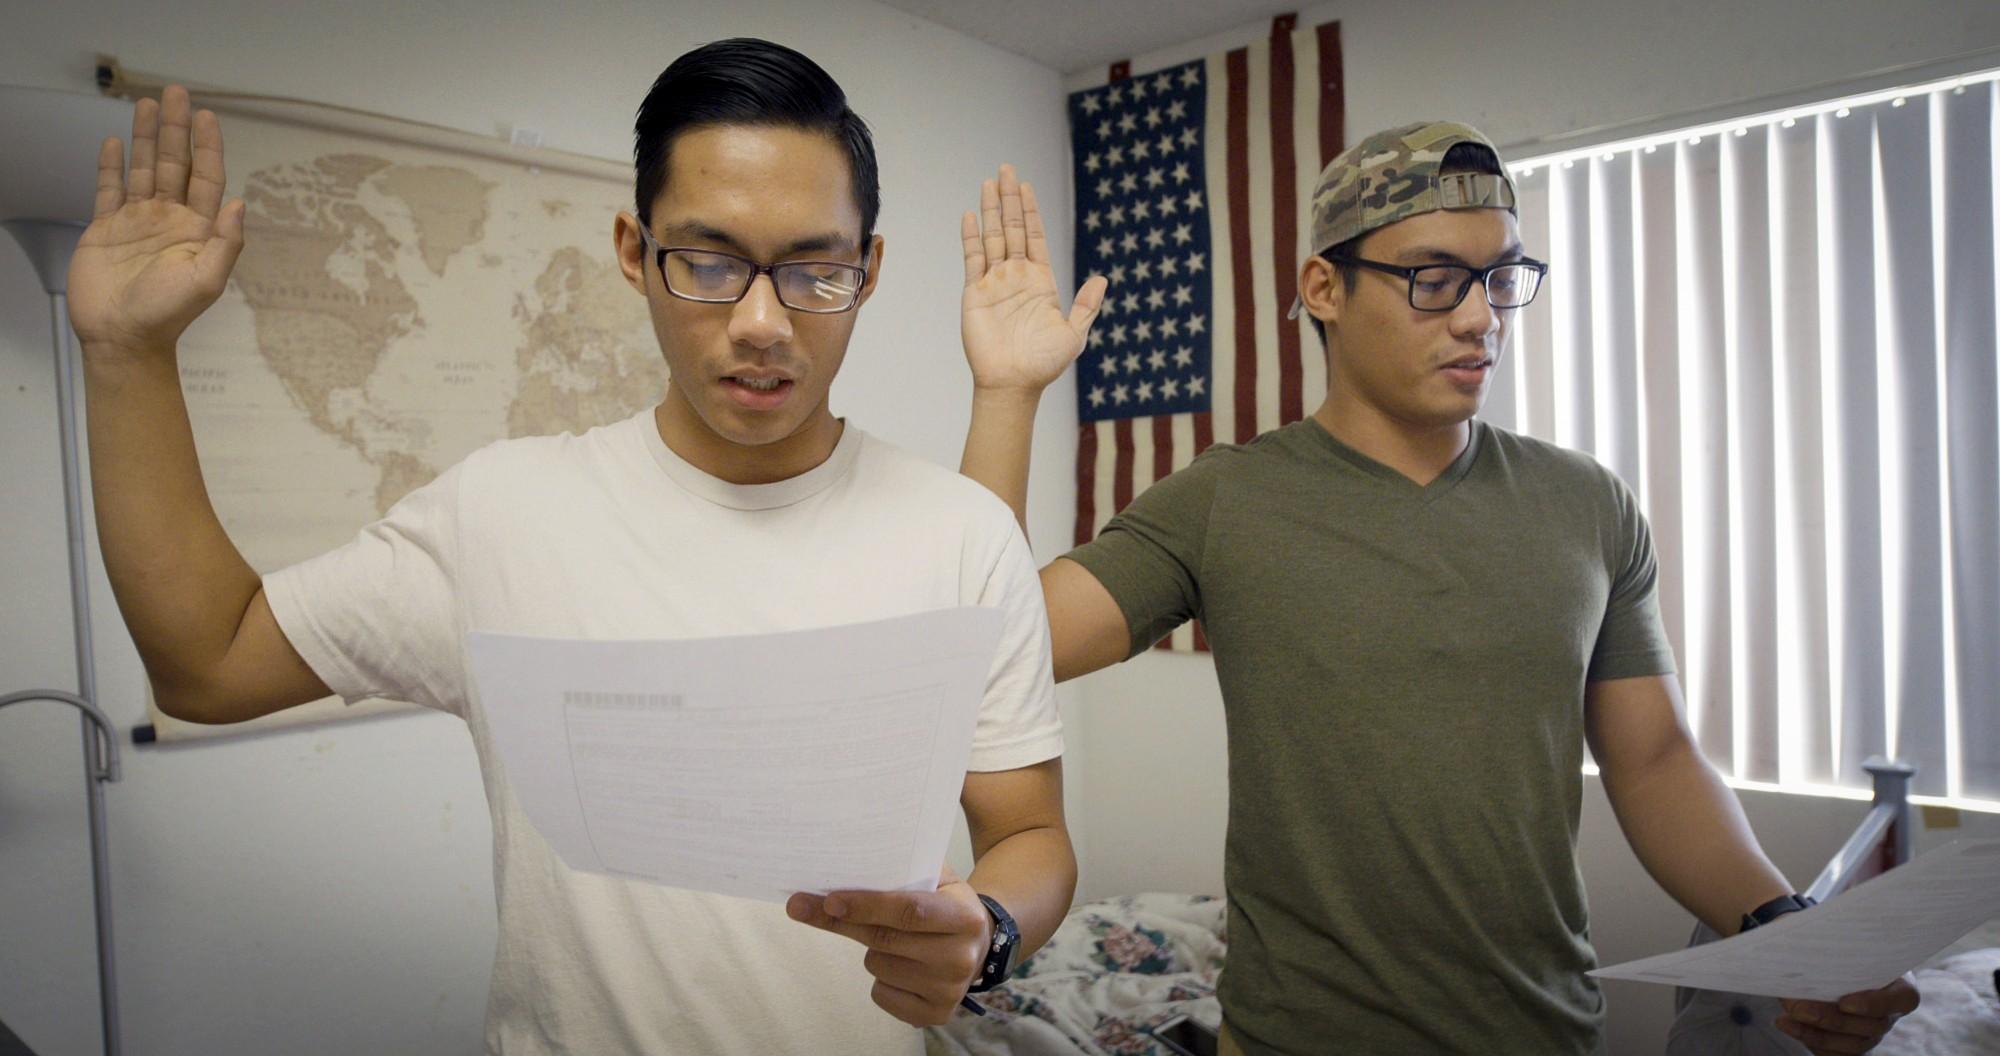 James and John Sena read their Oath of Enlistment for the U.S. Army.